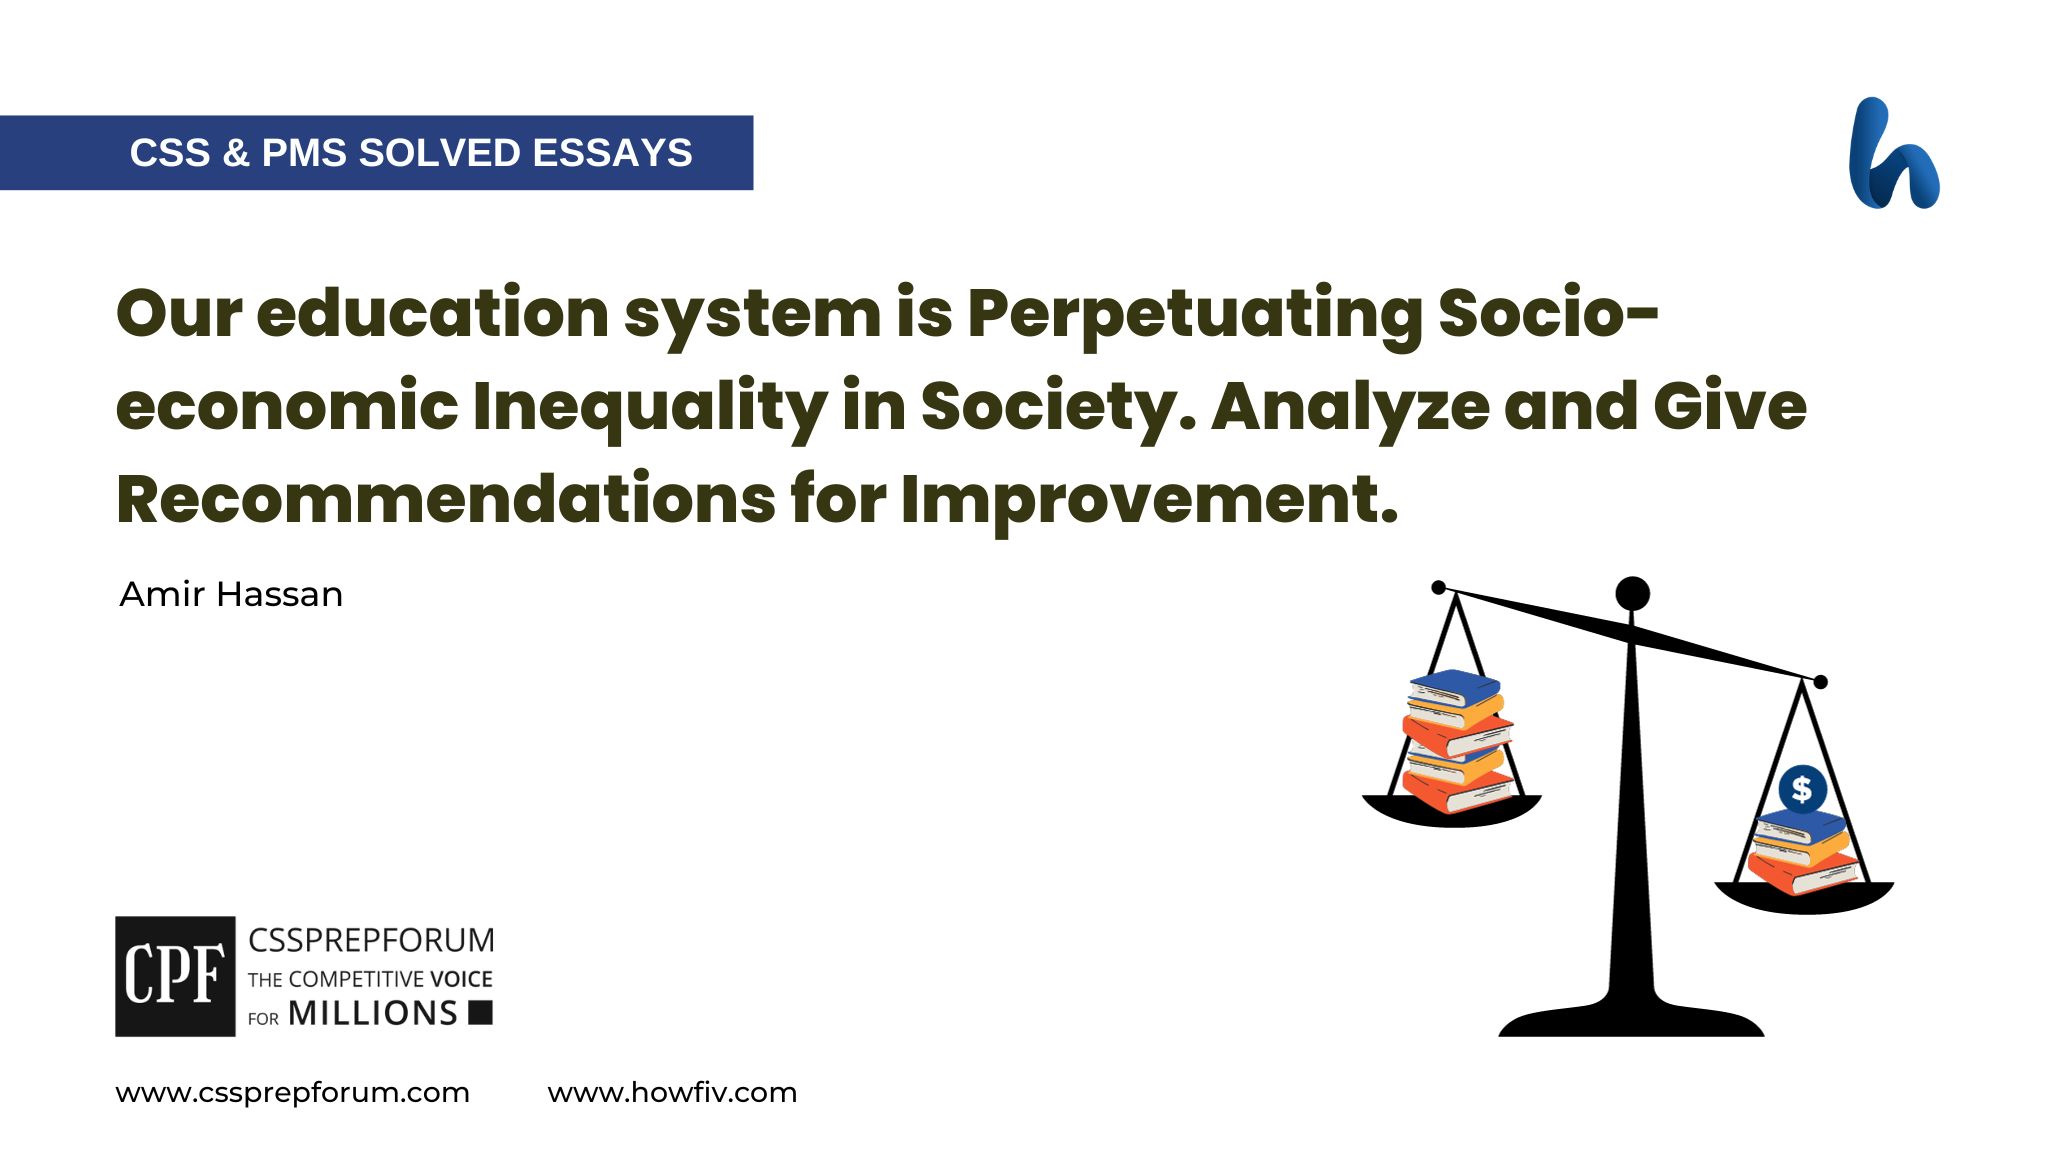 Our education system is Perpetuating Socio-economic Inequality in Society. Analyze and Give Recommendations for Improvement.